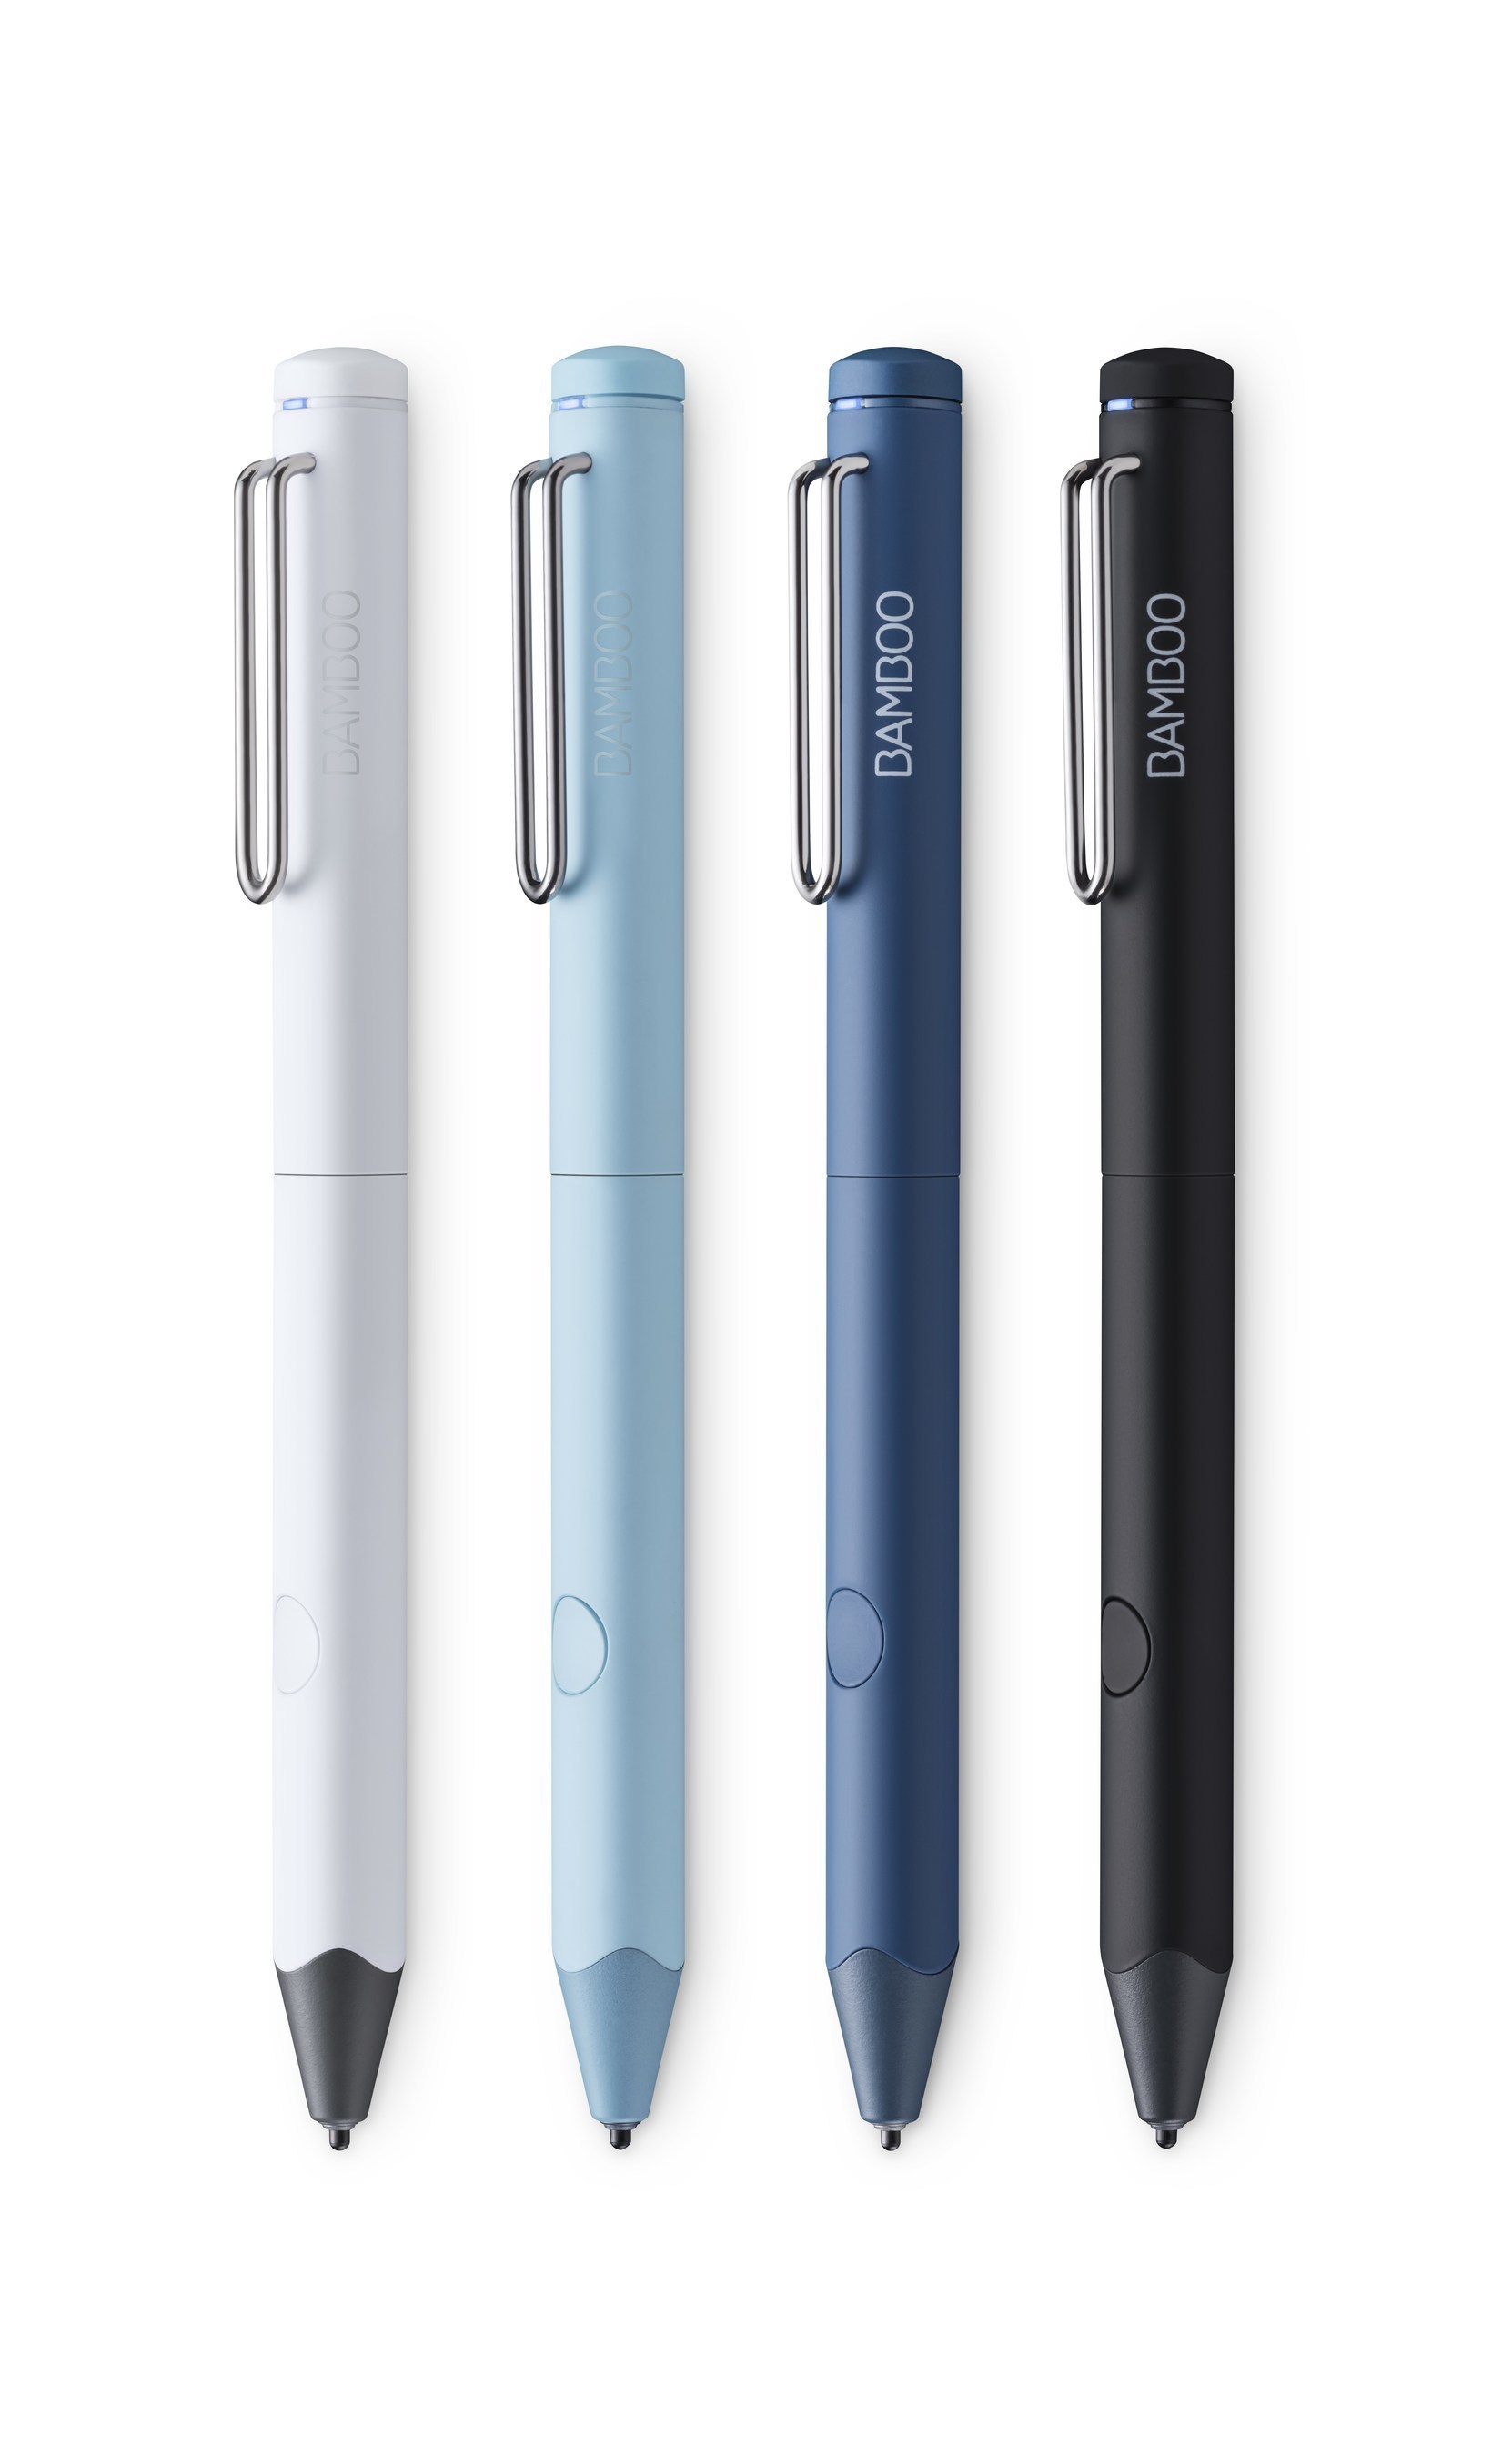 Bamboo Fineline is the stylus built for precision and the iPad.